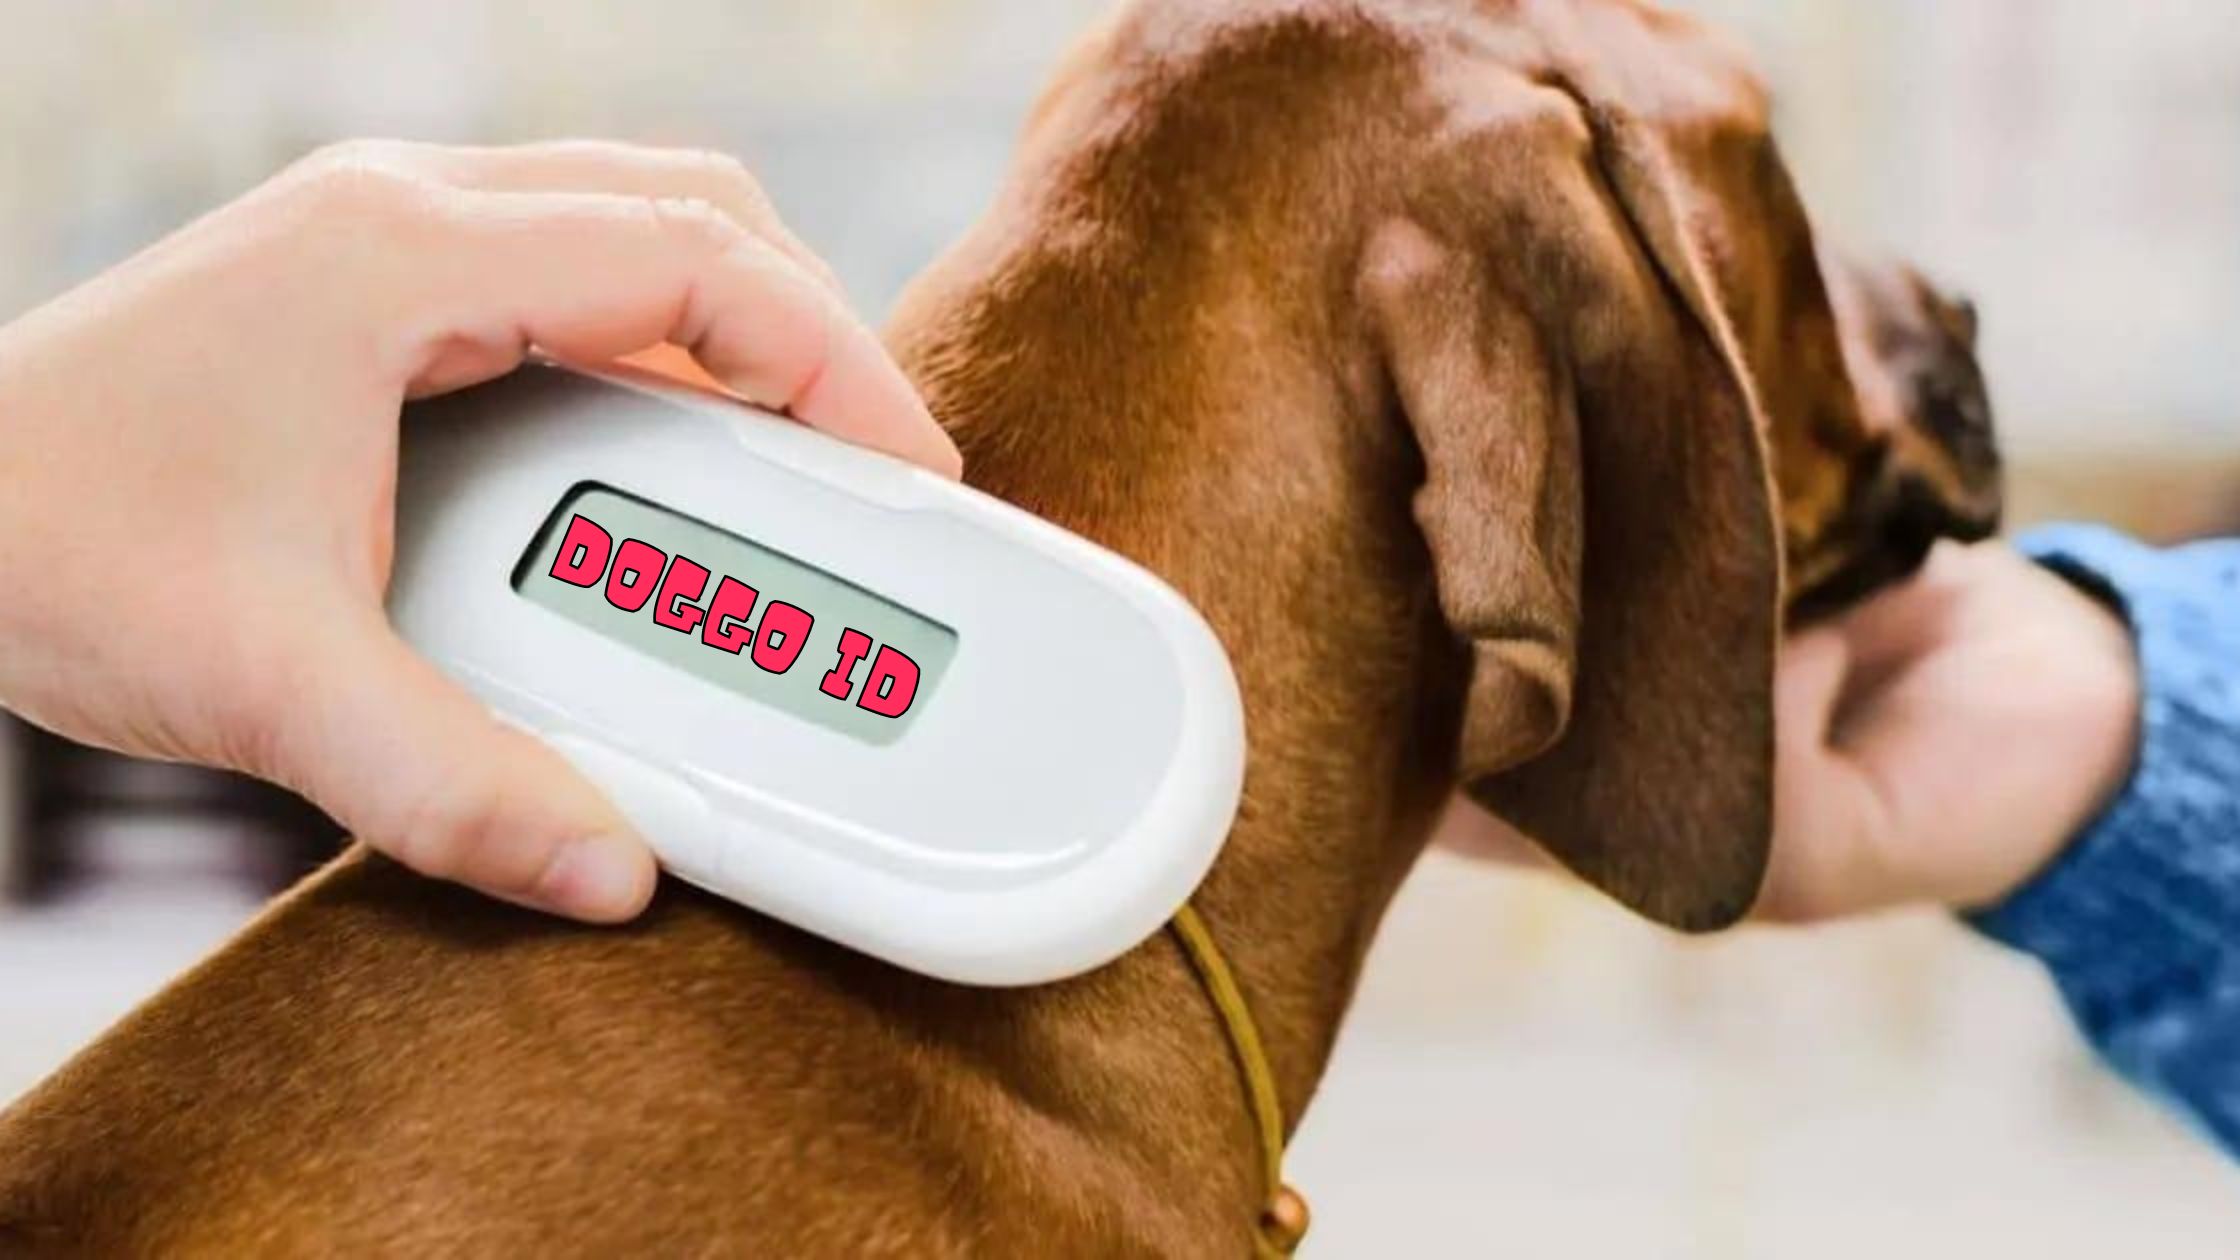 MICROCHIPPING DOGS